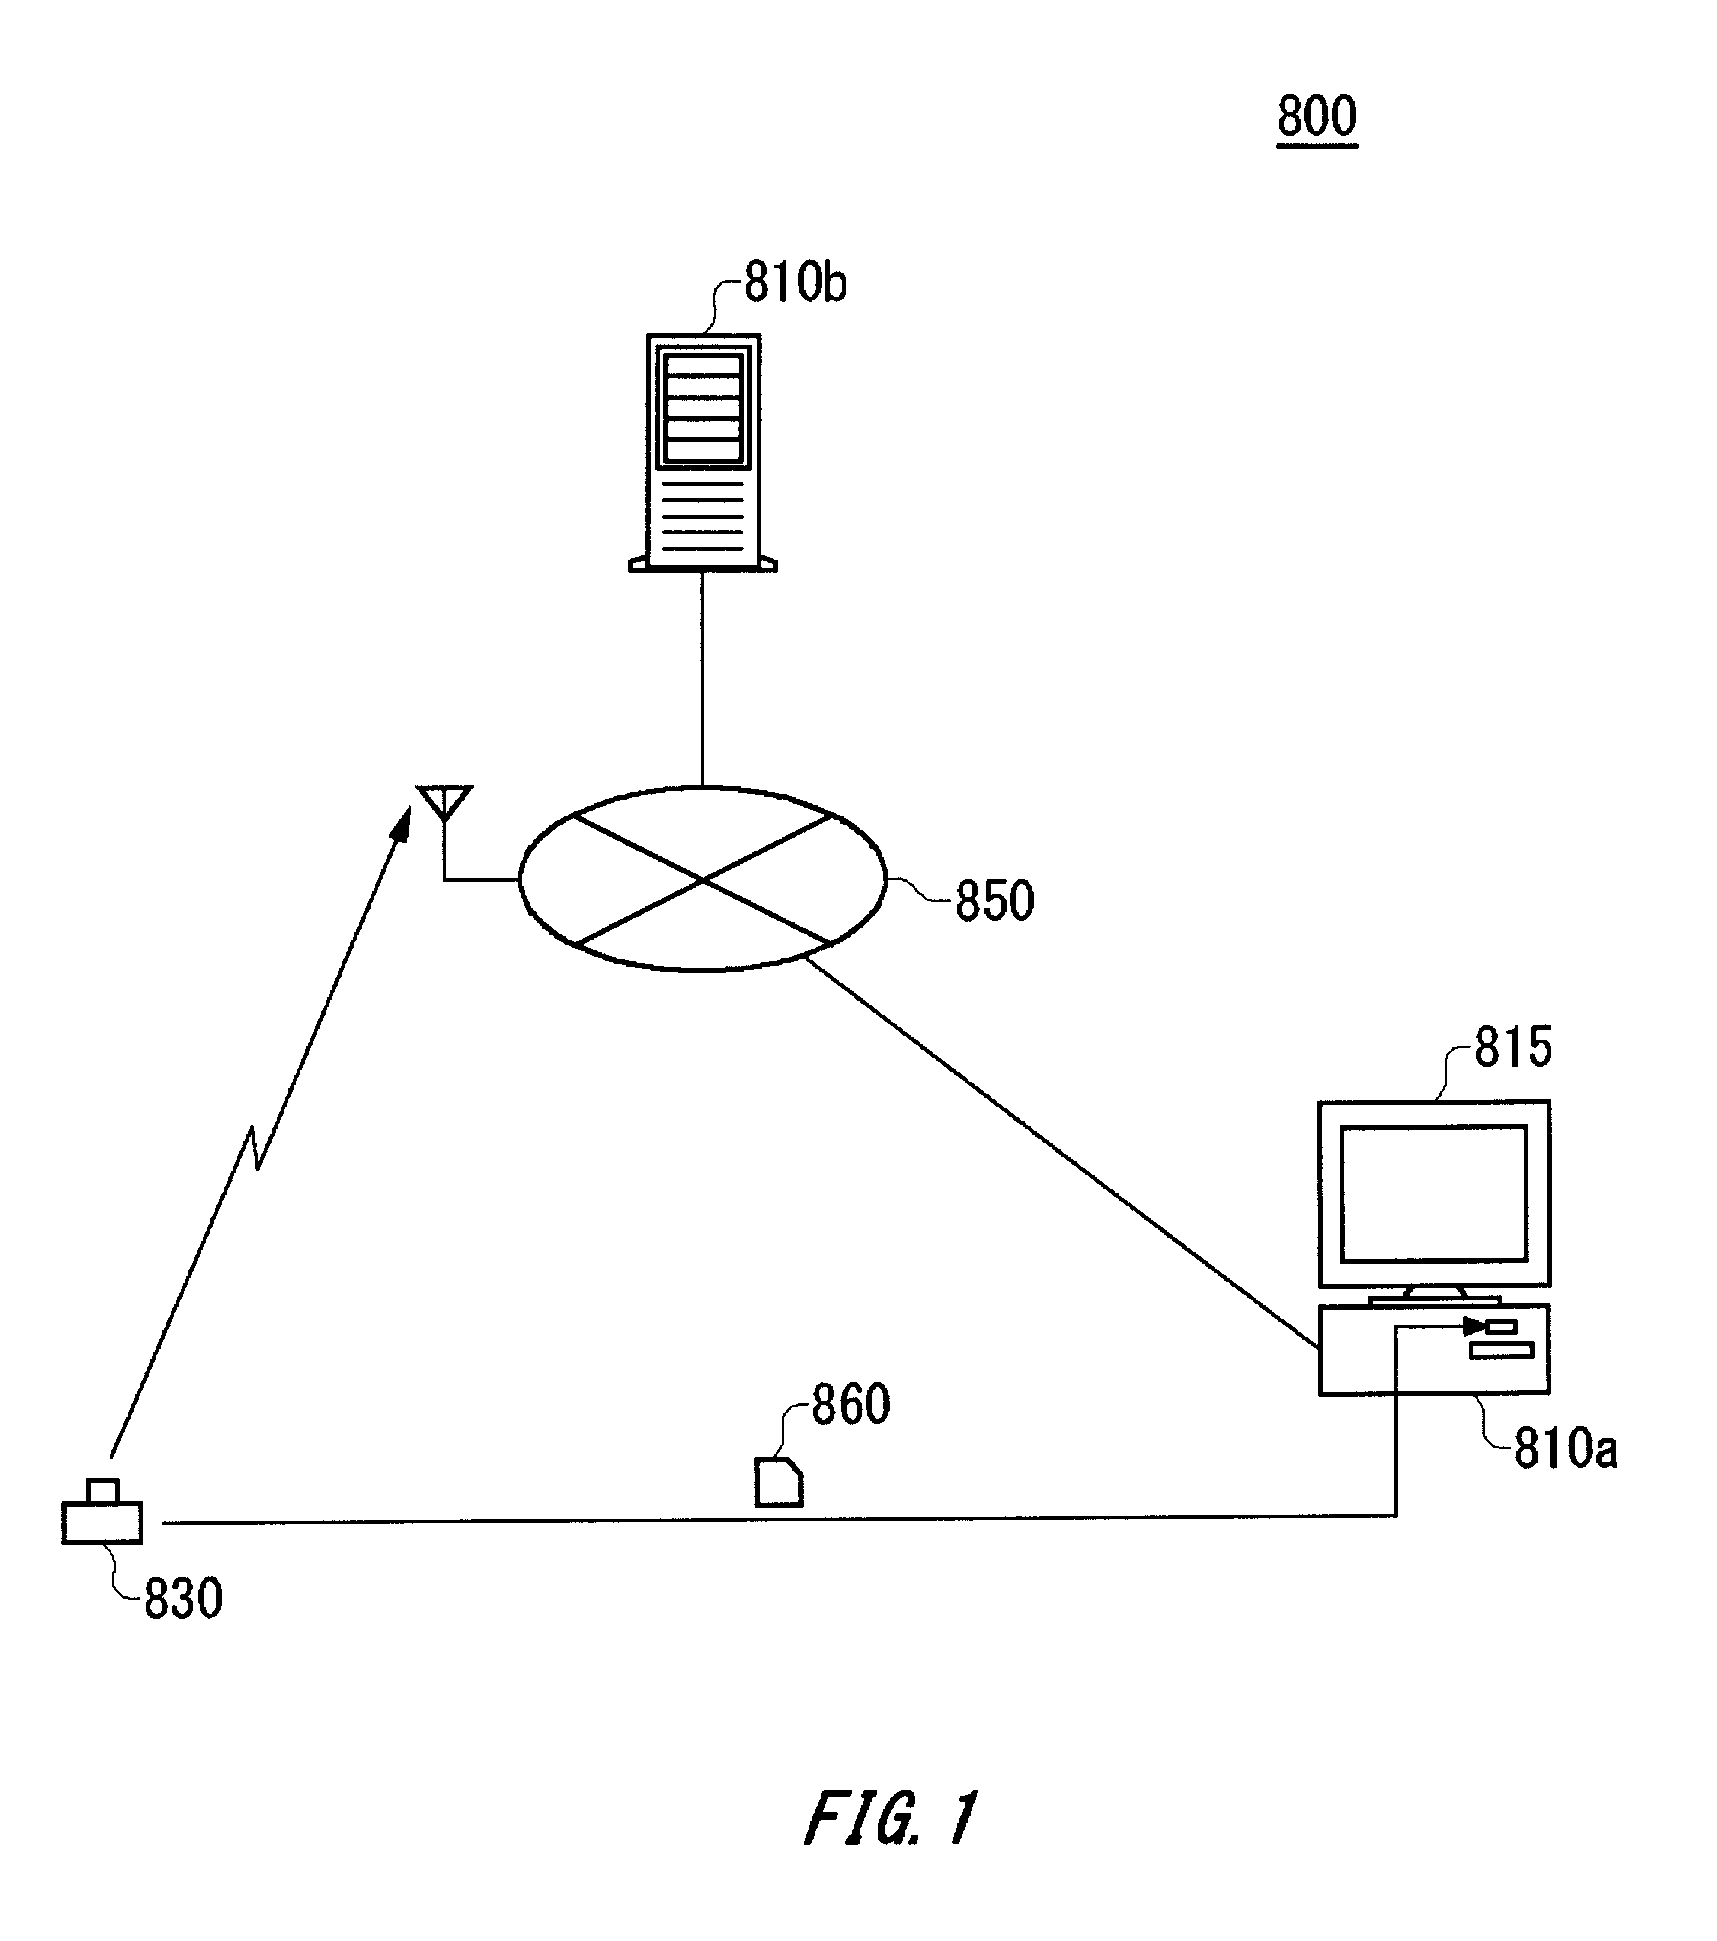 Image processing apparatus, image processing method, image managing apparatus, image managing method, computer program product, and image order sheet